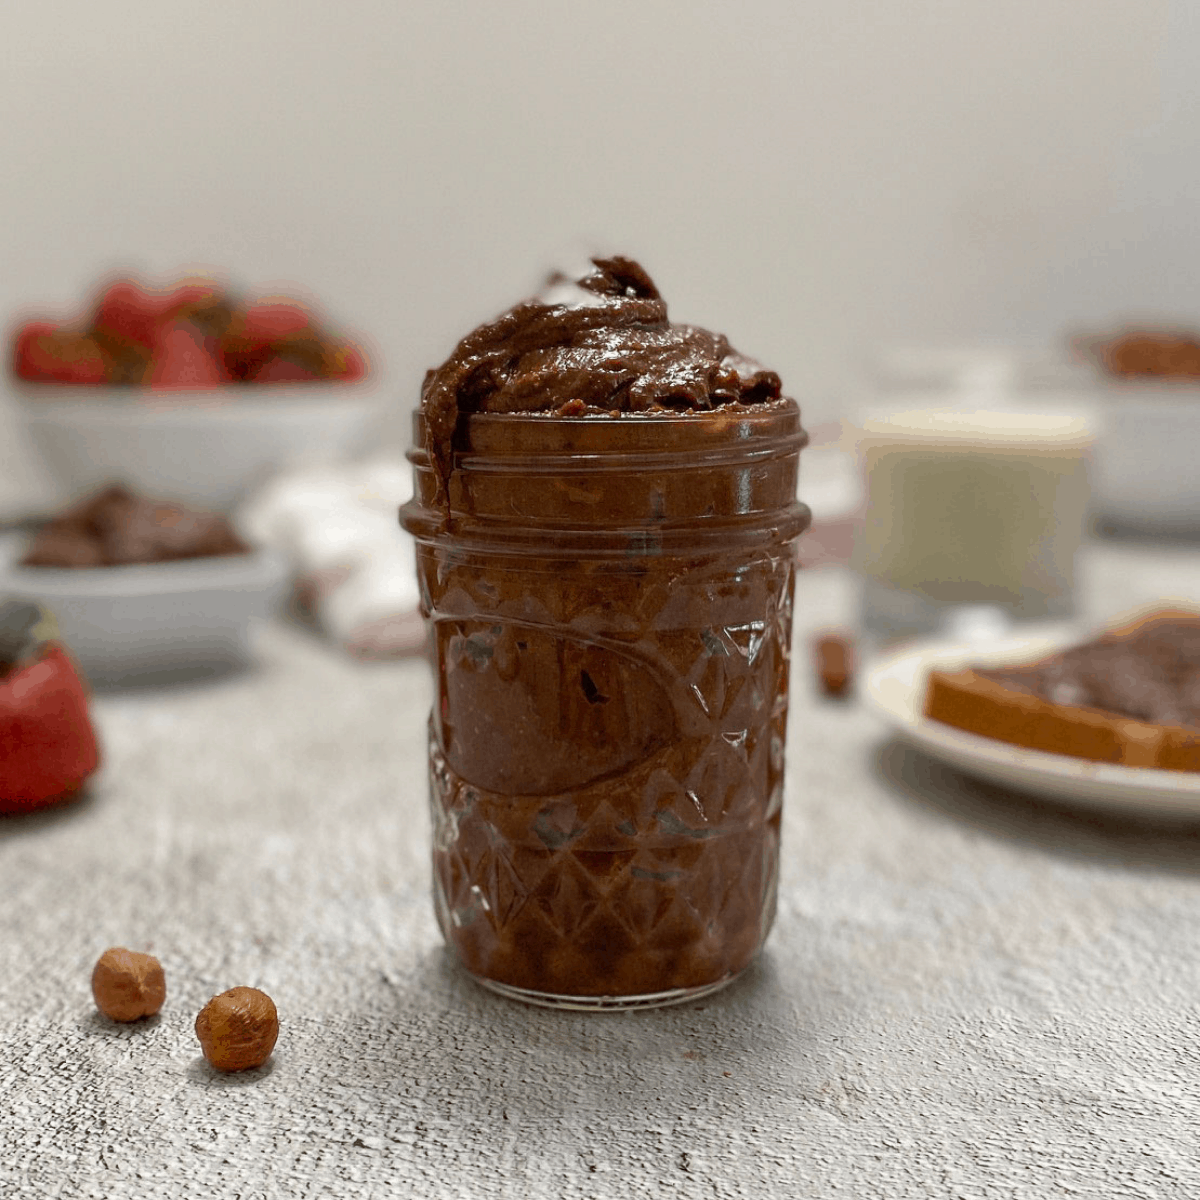 Nutella in glass jar with hazelnuts and strawberries in background.